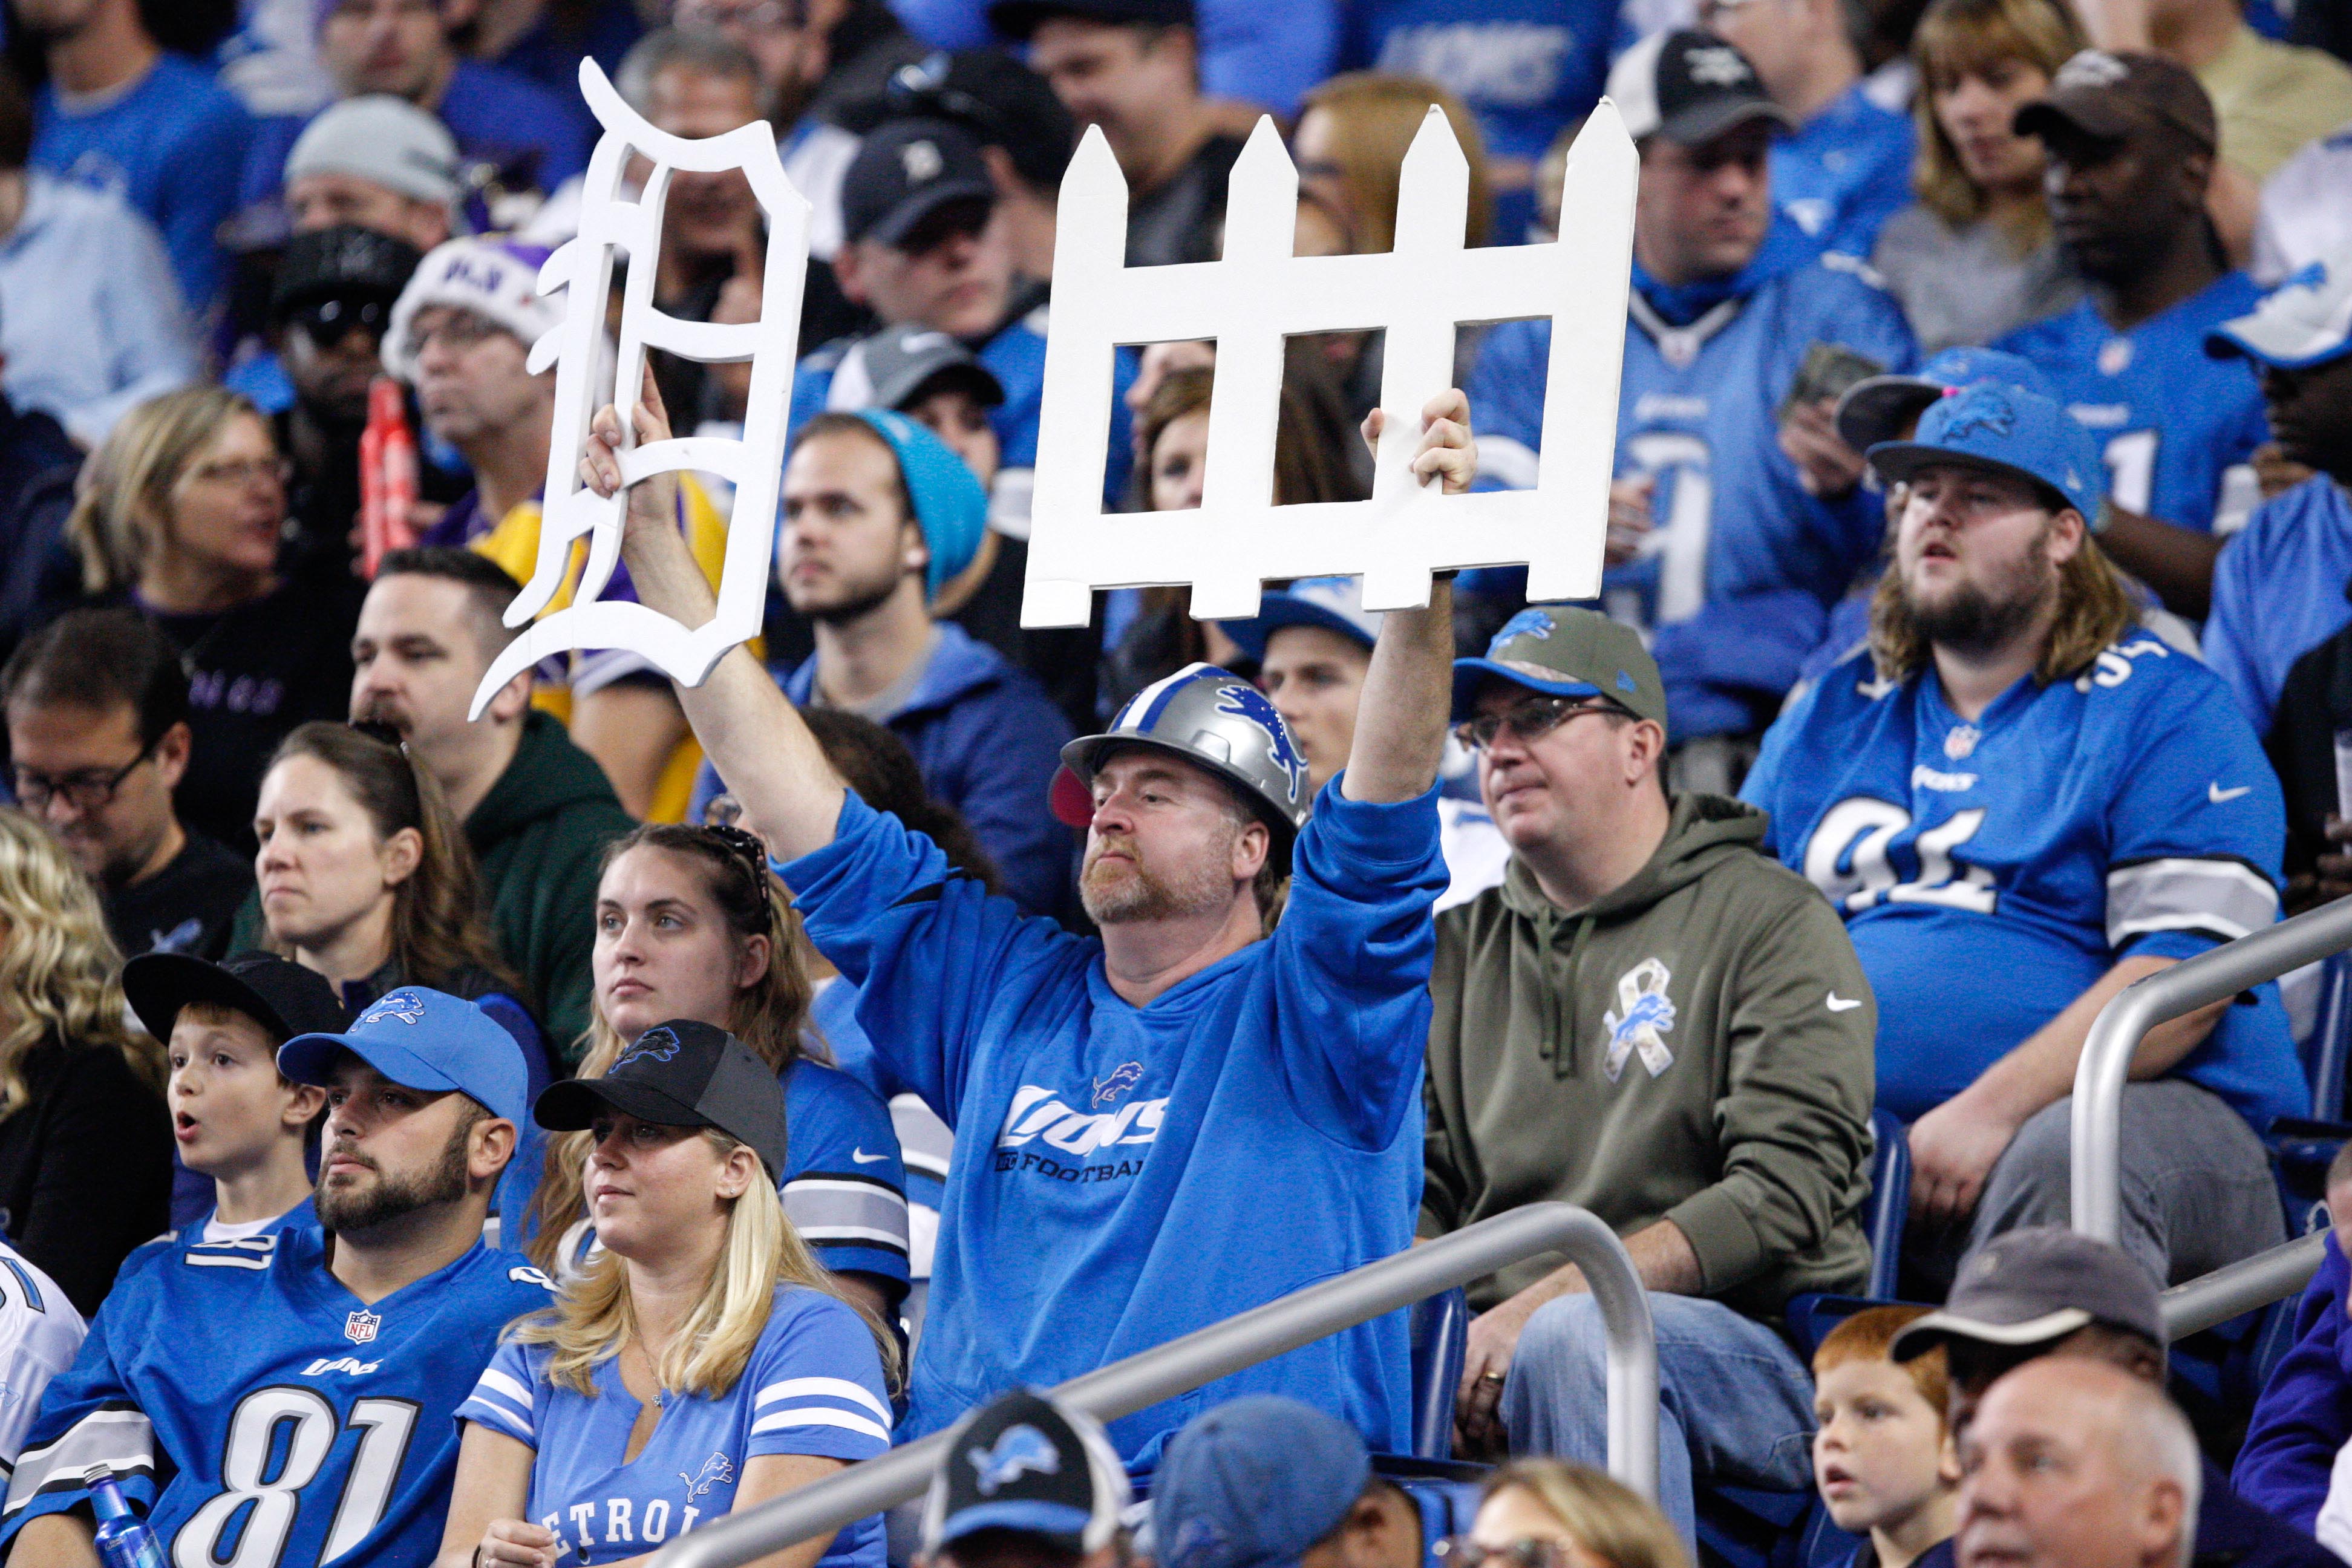 Detroit Lions: Ticket Prices Get Modest Increase for 2017 Season